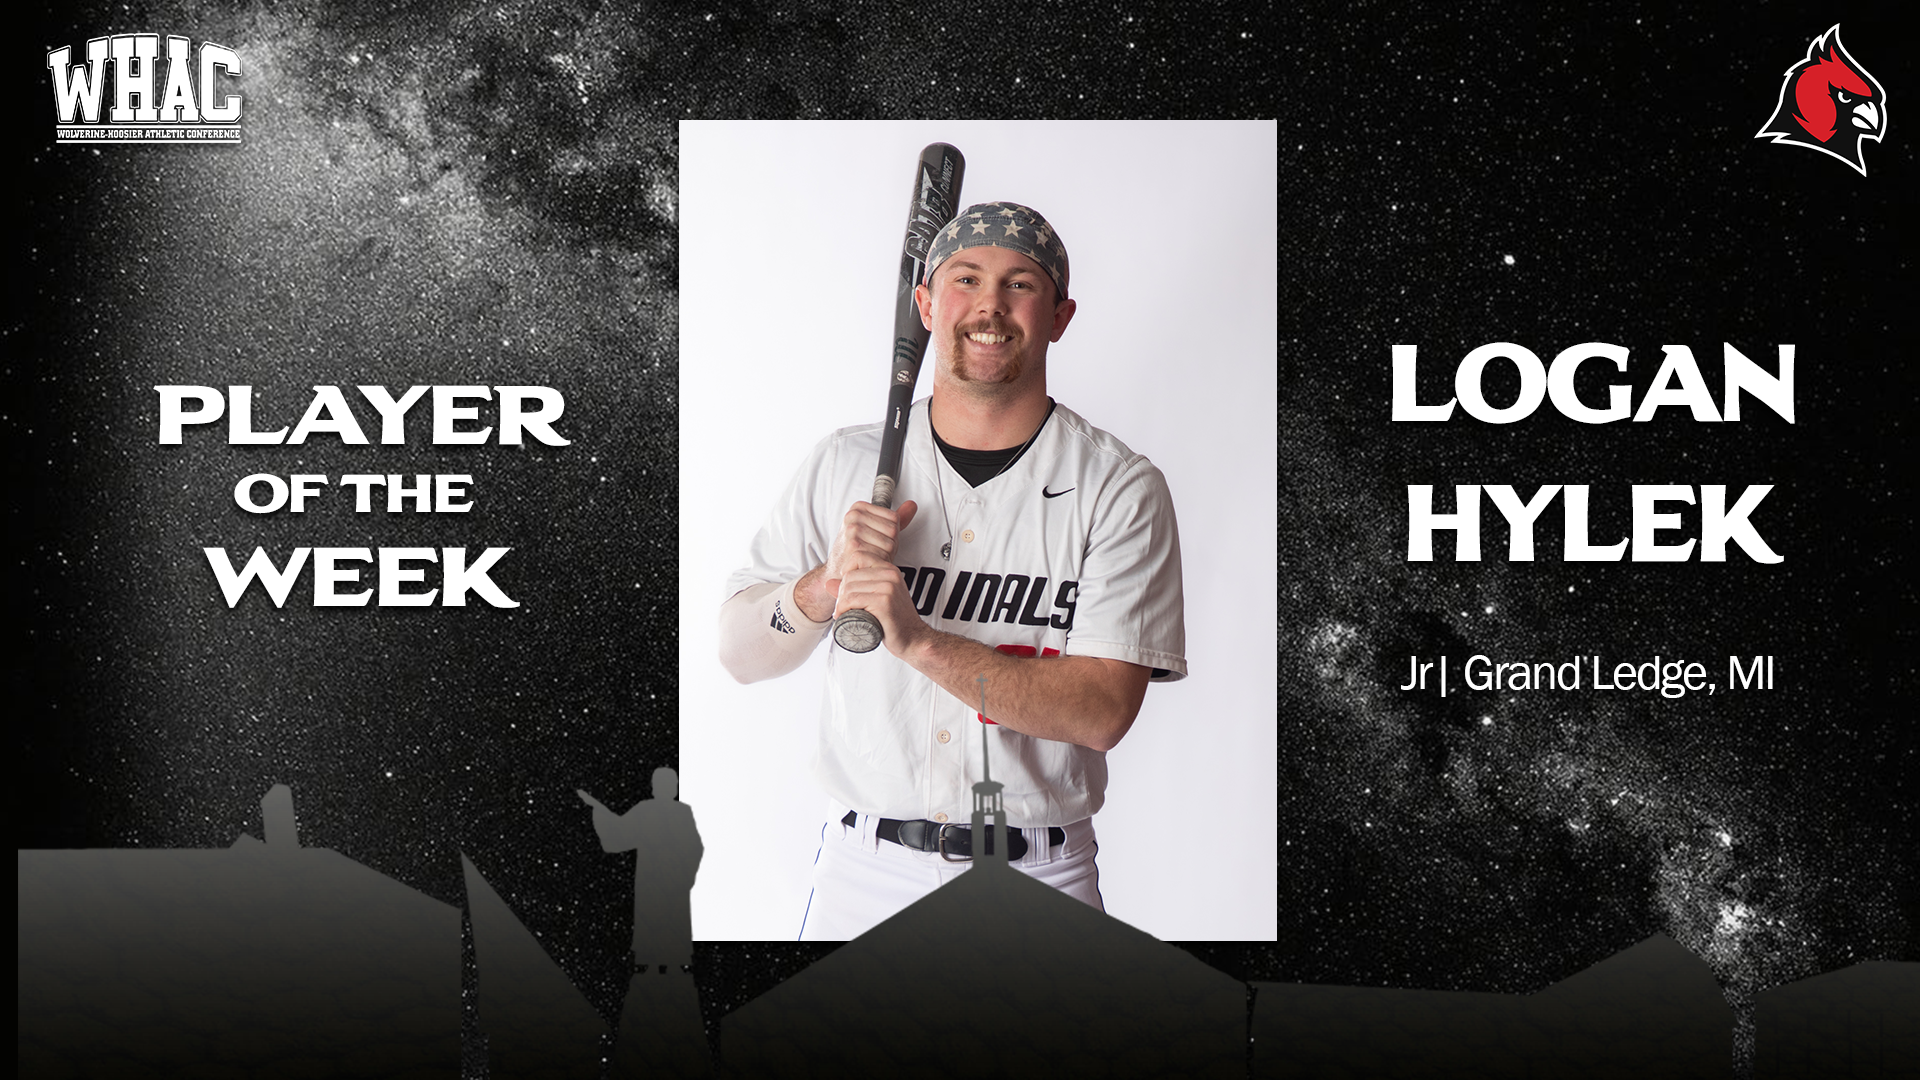 Hylek earns second straight WHAC Player of the Week